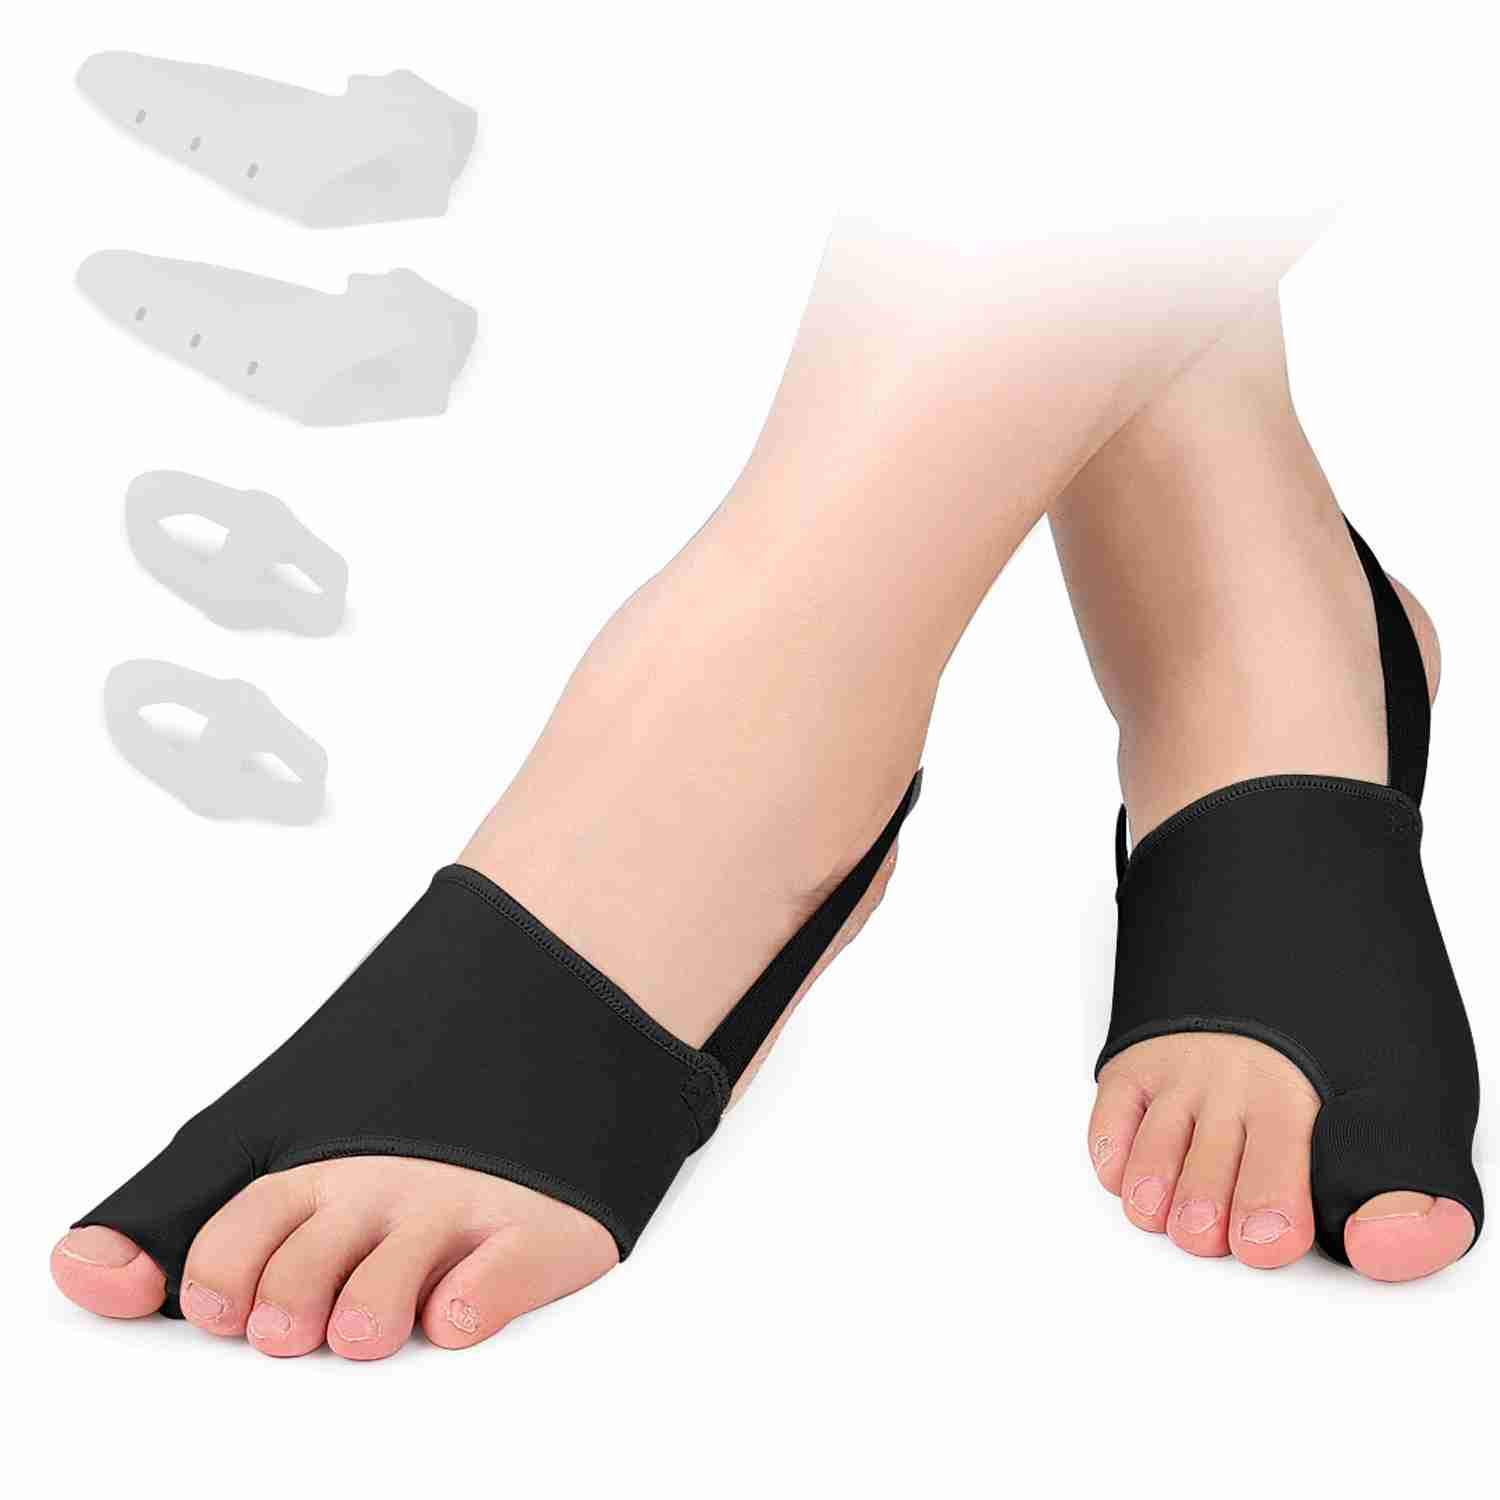 bunion-corrector-for-women-big-toe with cash back rebate